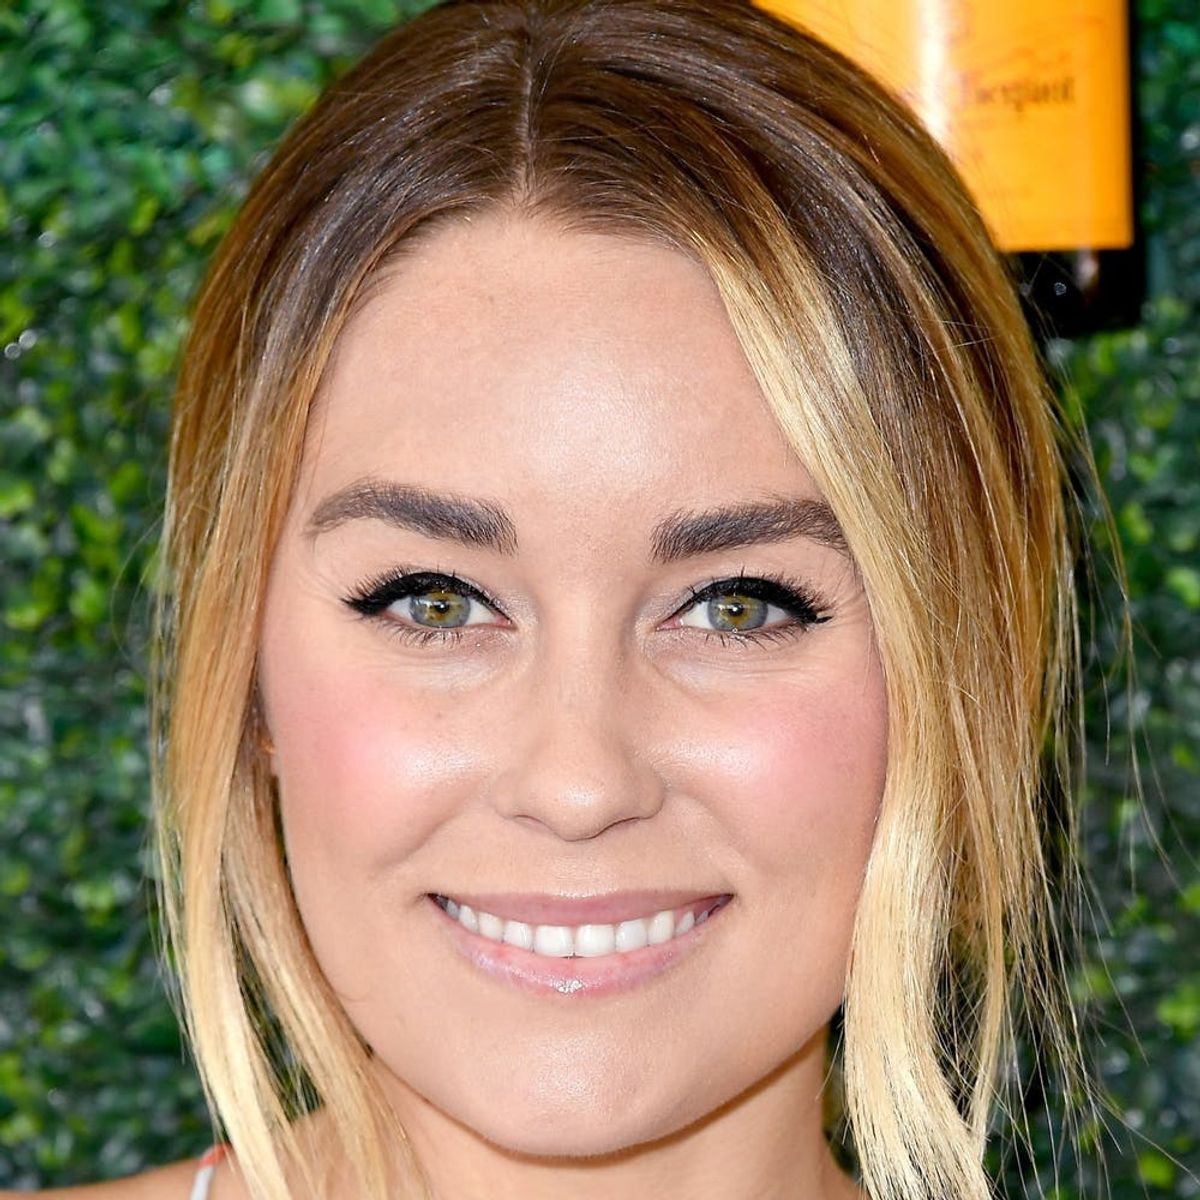 OMG: Lauren Conrad Is Going to Be a Mom in 2017